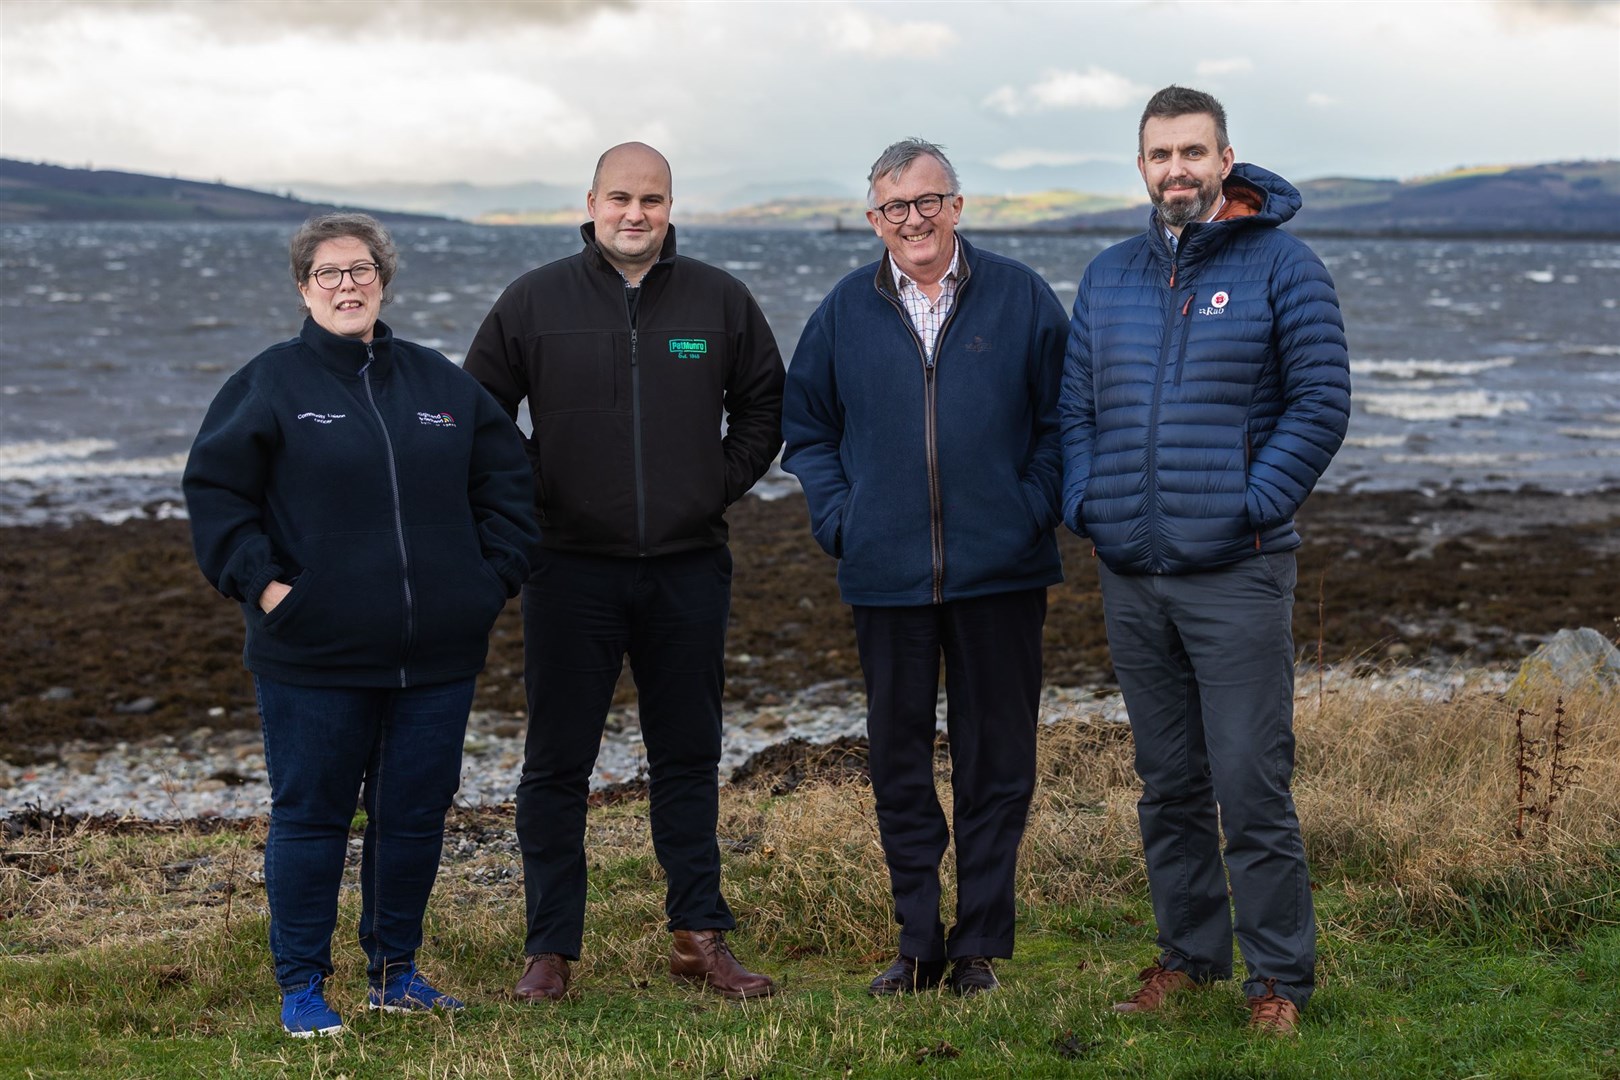 Claudette Bruce (from left), community liaison officer, LBNL, Mark Smith, contracts manager, Pat Munro, Jamie Stone, MP for Caithness, Sutherland and Easter Ross and Gavin Rodgers, CEO of LBNL.